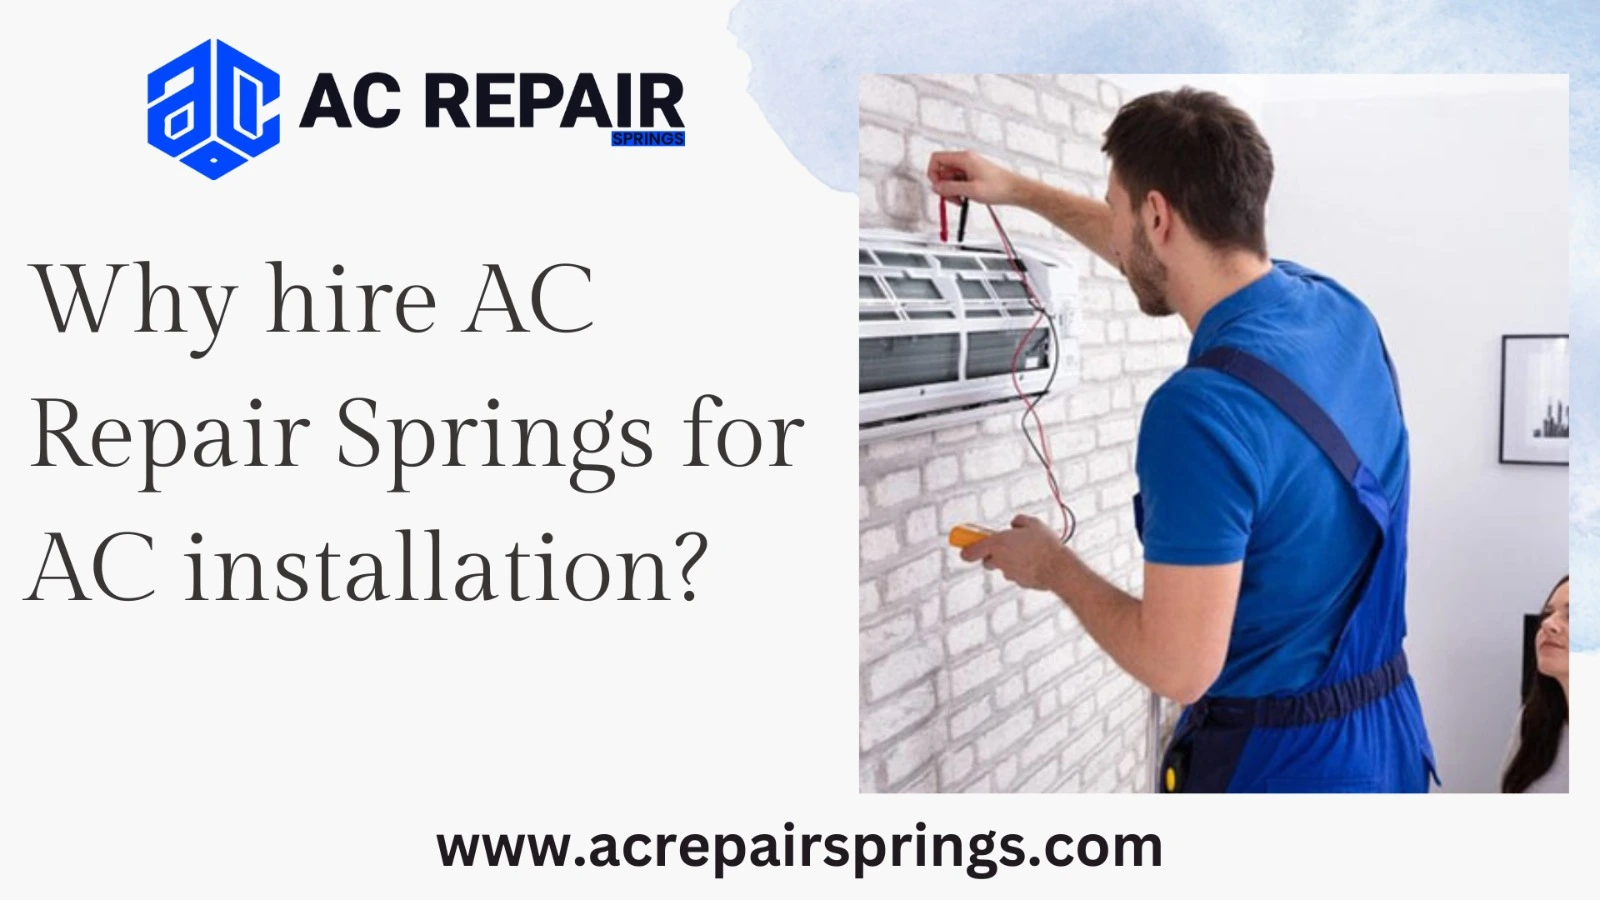 Why hire AC Repair Springs for AC installation?